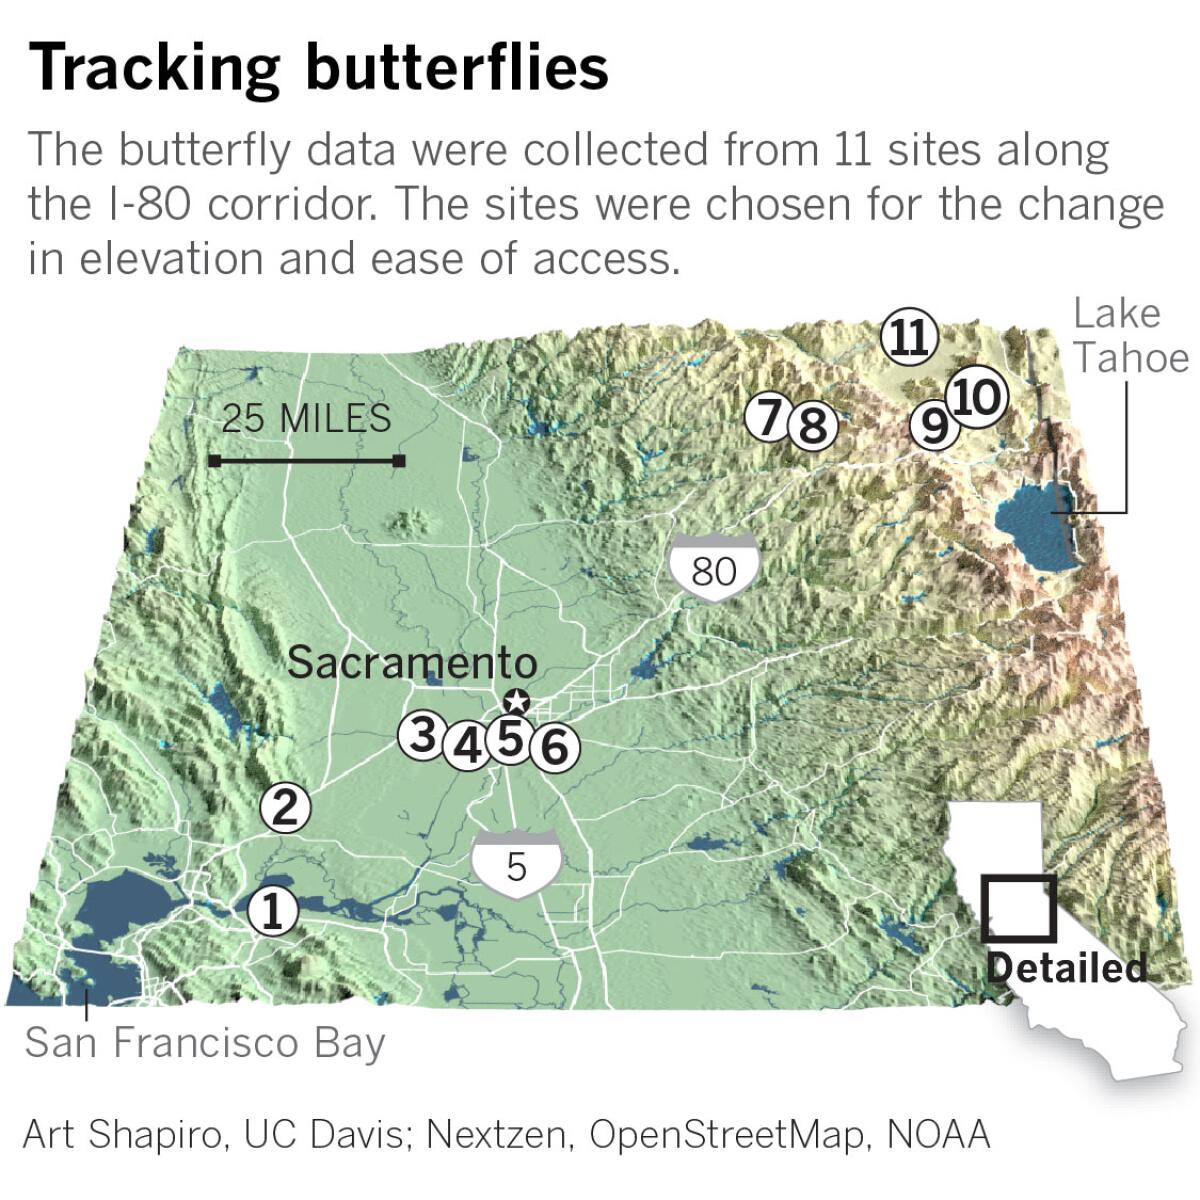 Map of northern California locating 11 sites where butterfly data was collected.